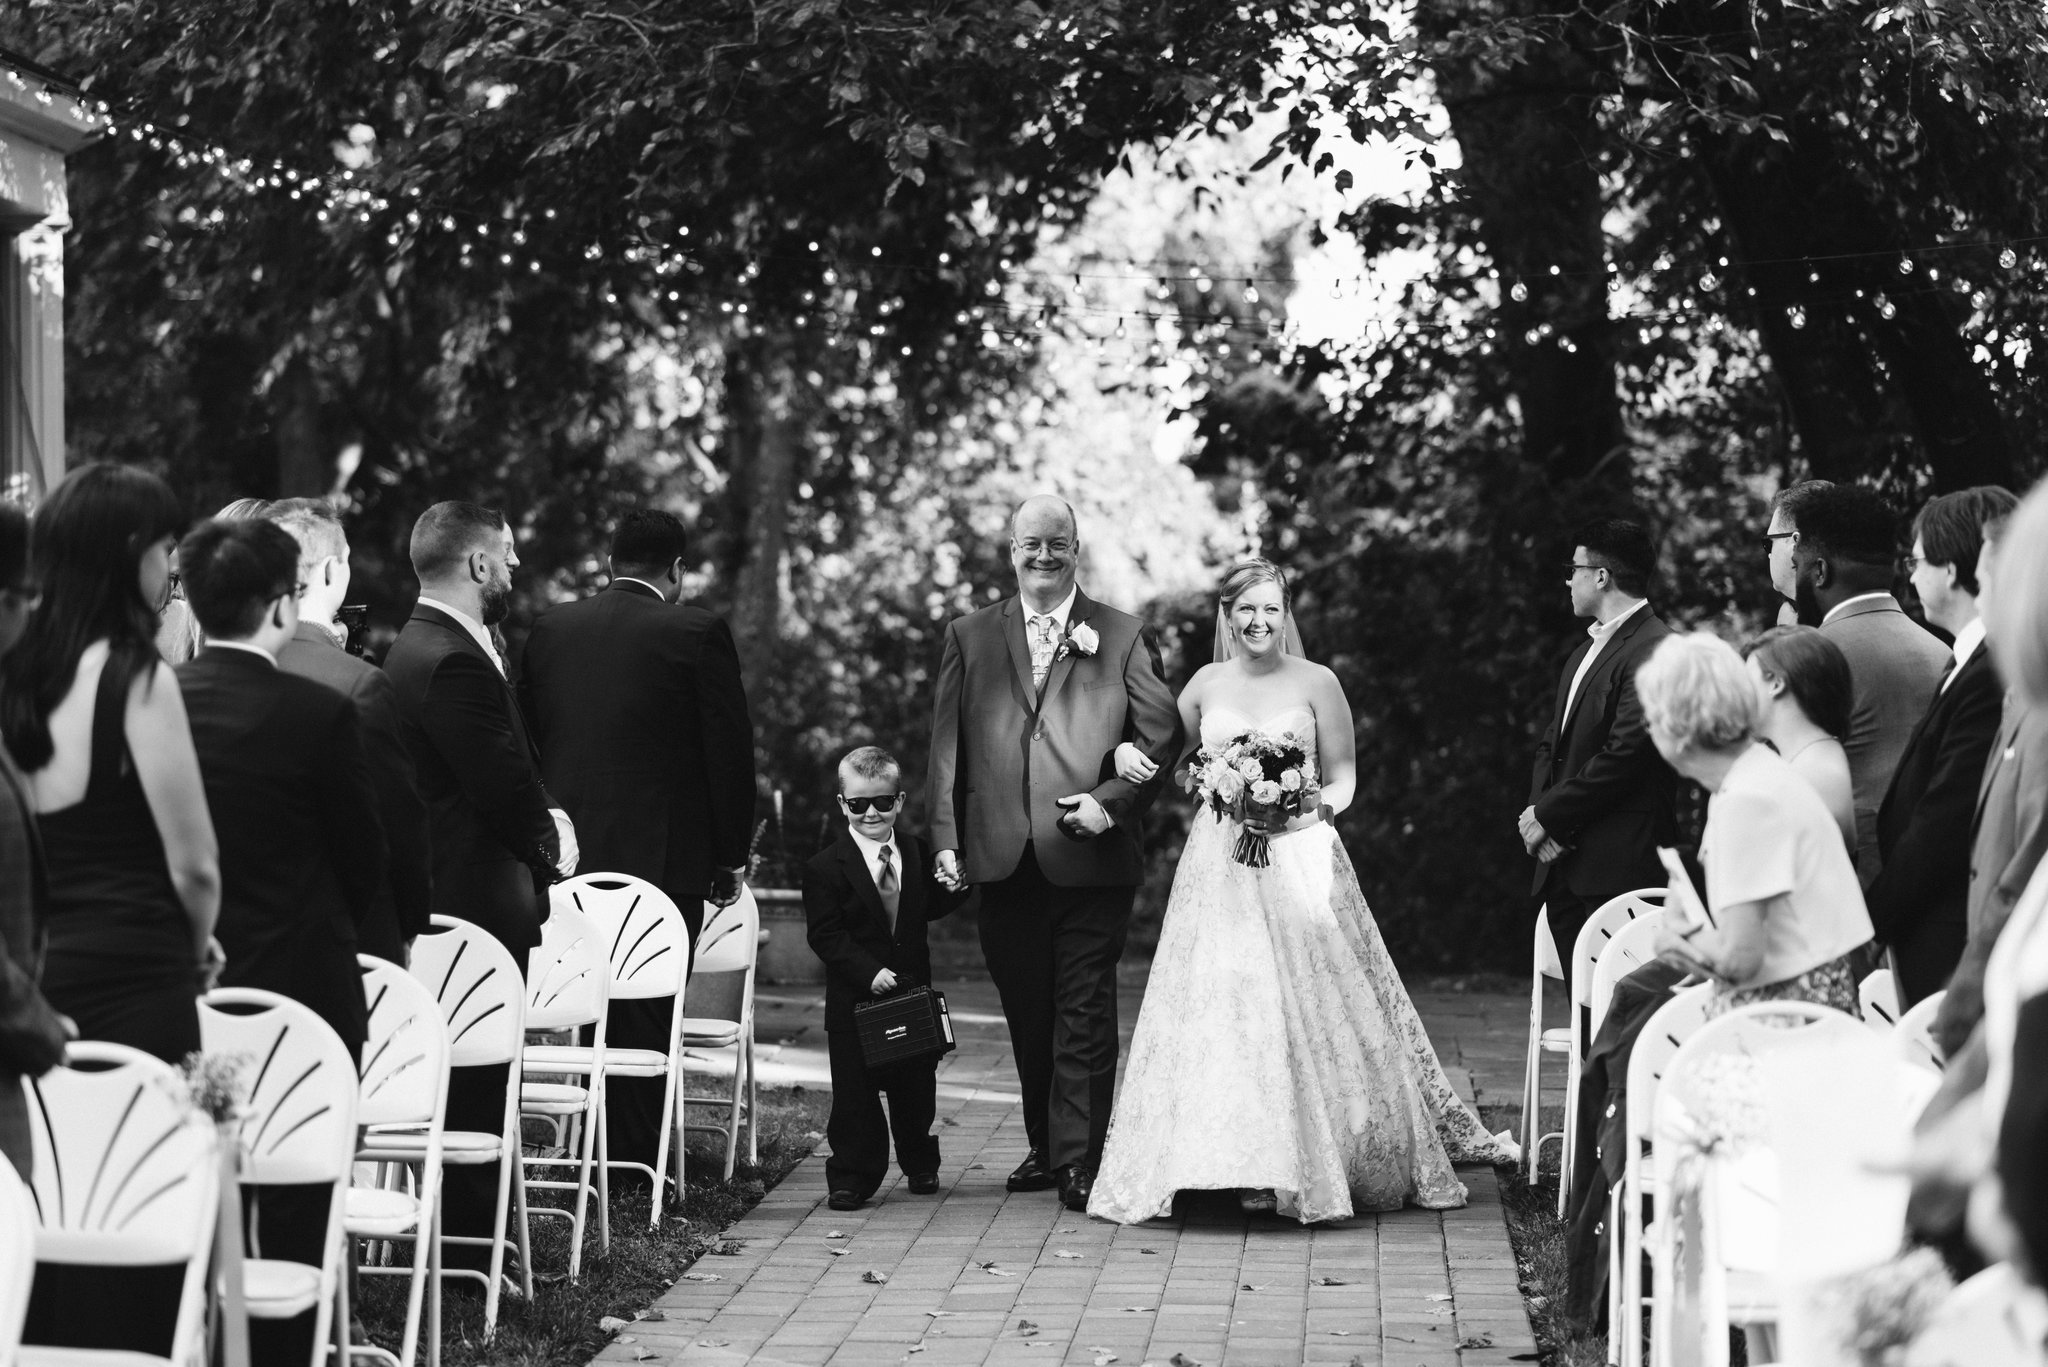  Ellicott City, Baltimore Wedding Photographer, Wayside Inn, Summer Wedding, Romantic, Traditional, Bride Walking Down Aisle with Father of the Bride and Ring Bearer, Black and White Photo 